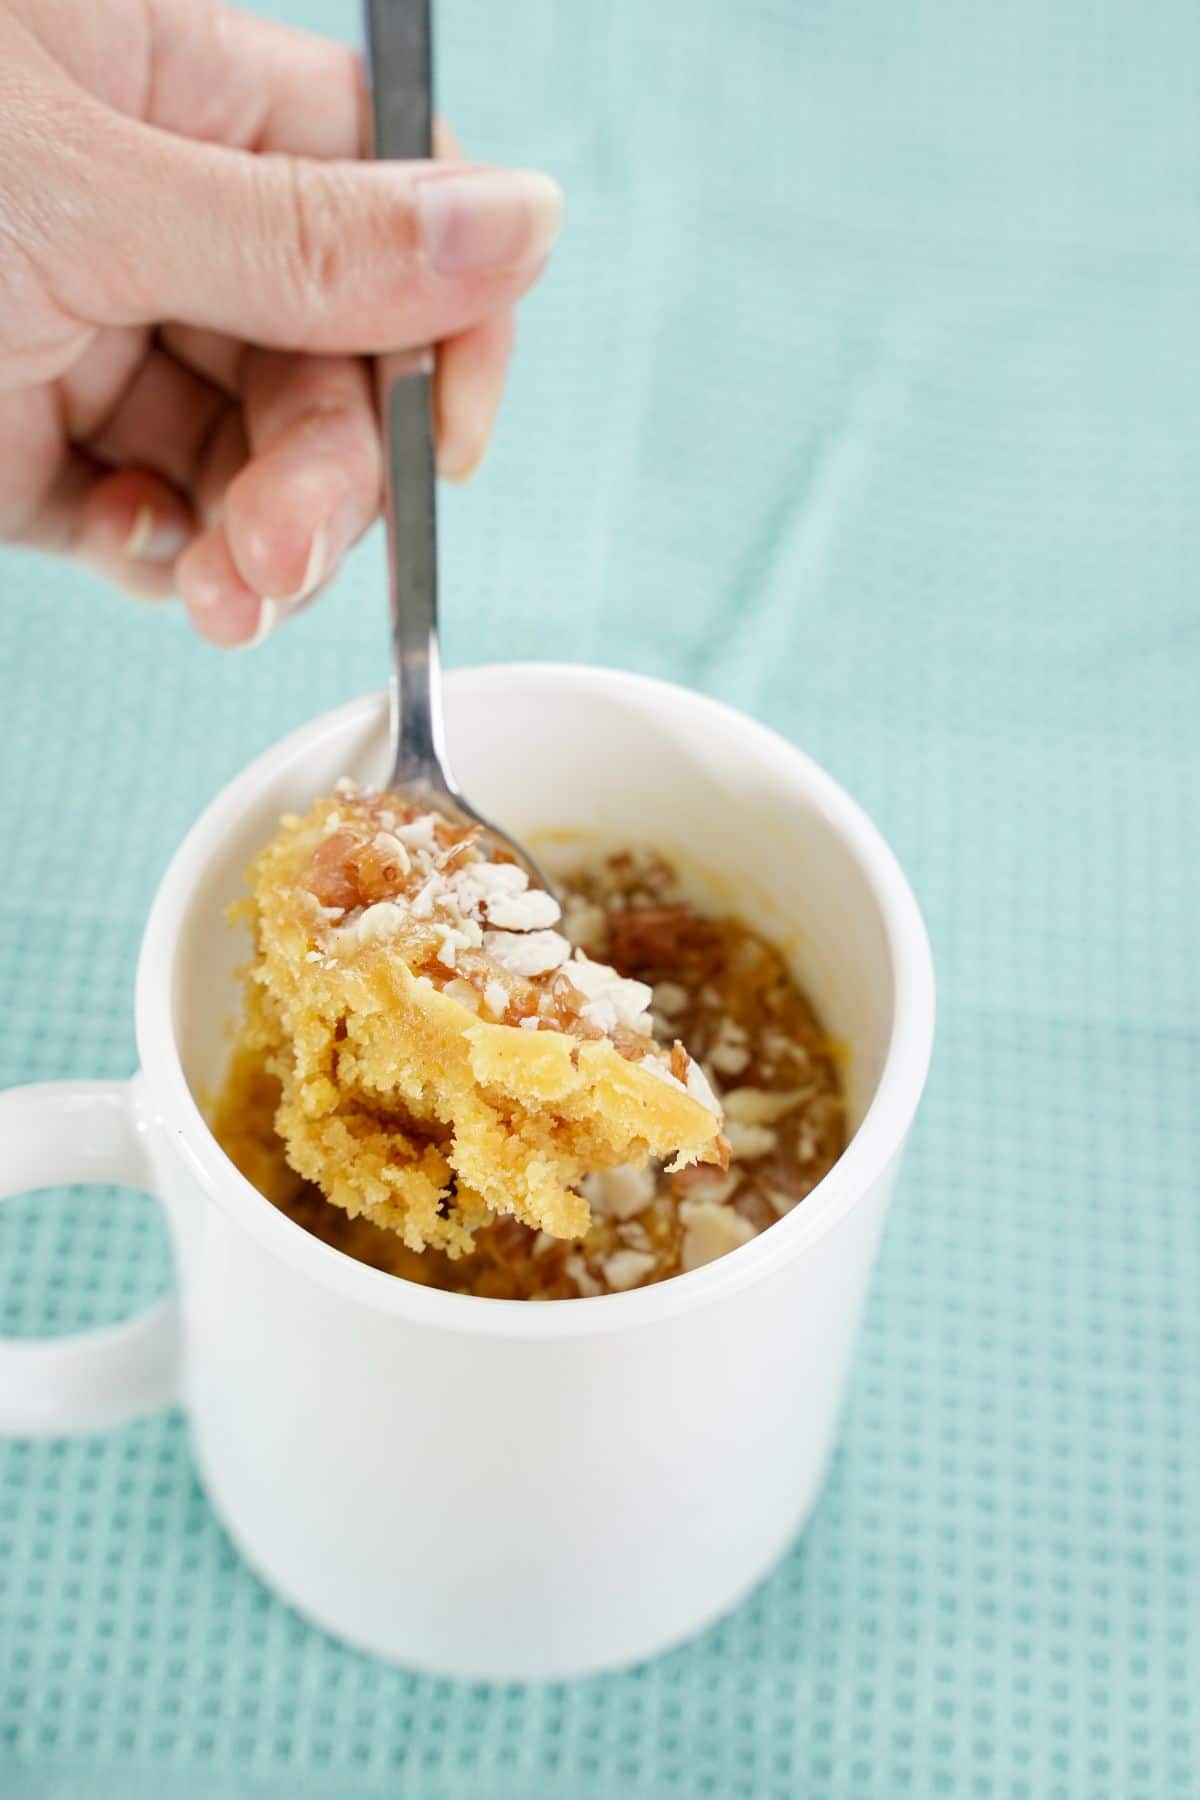 A spoon full of Peanut Butter Cookie in a Mug